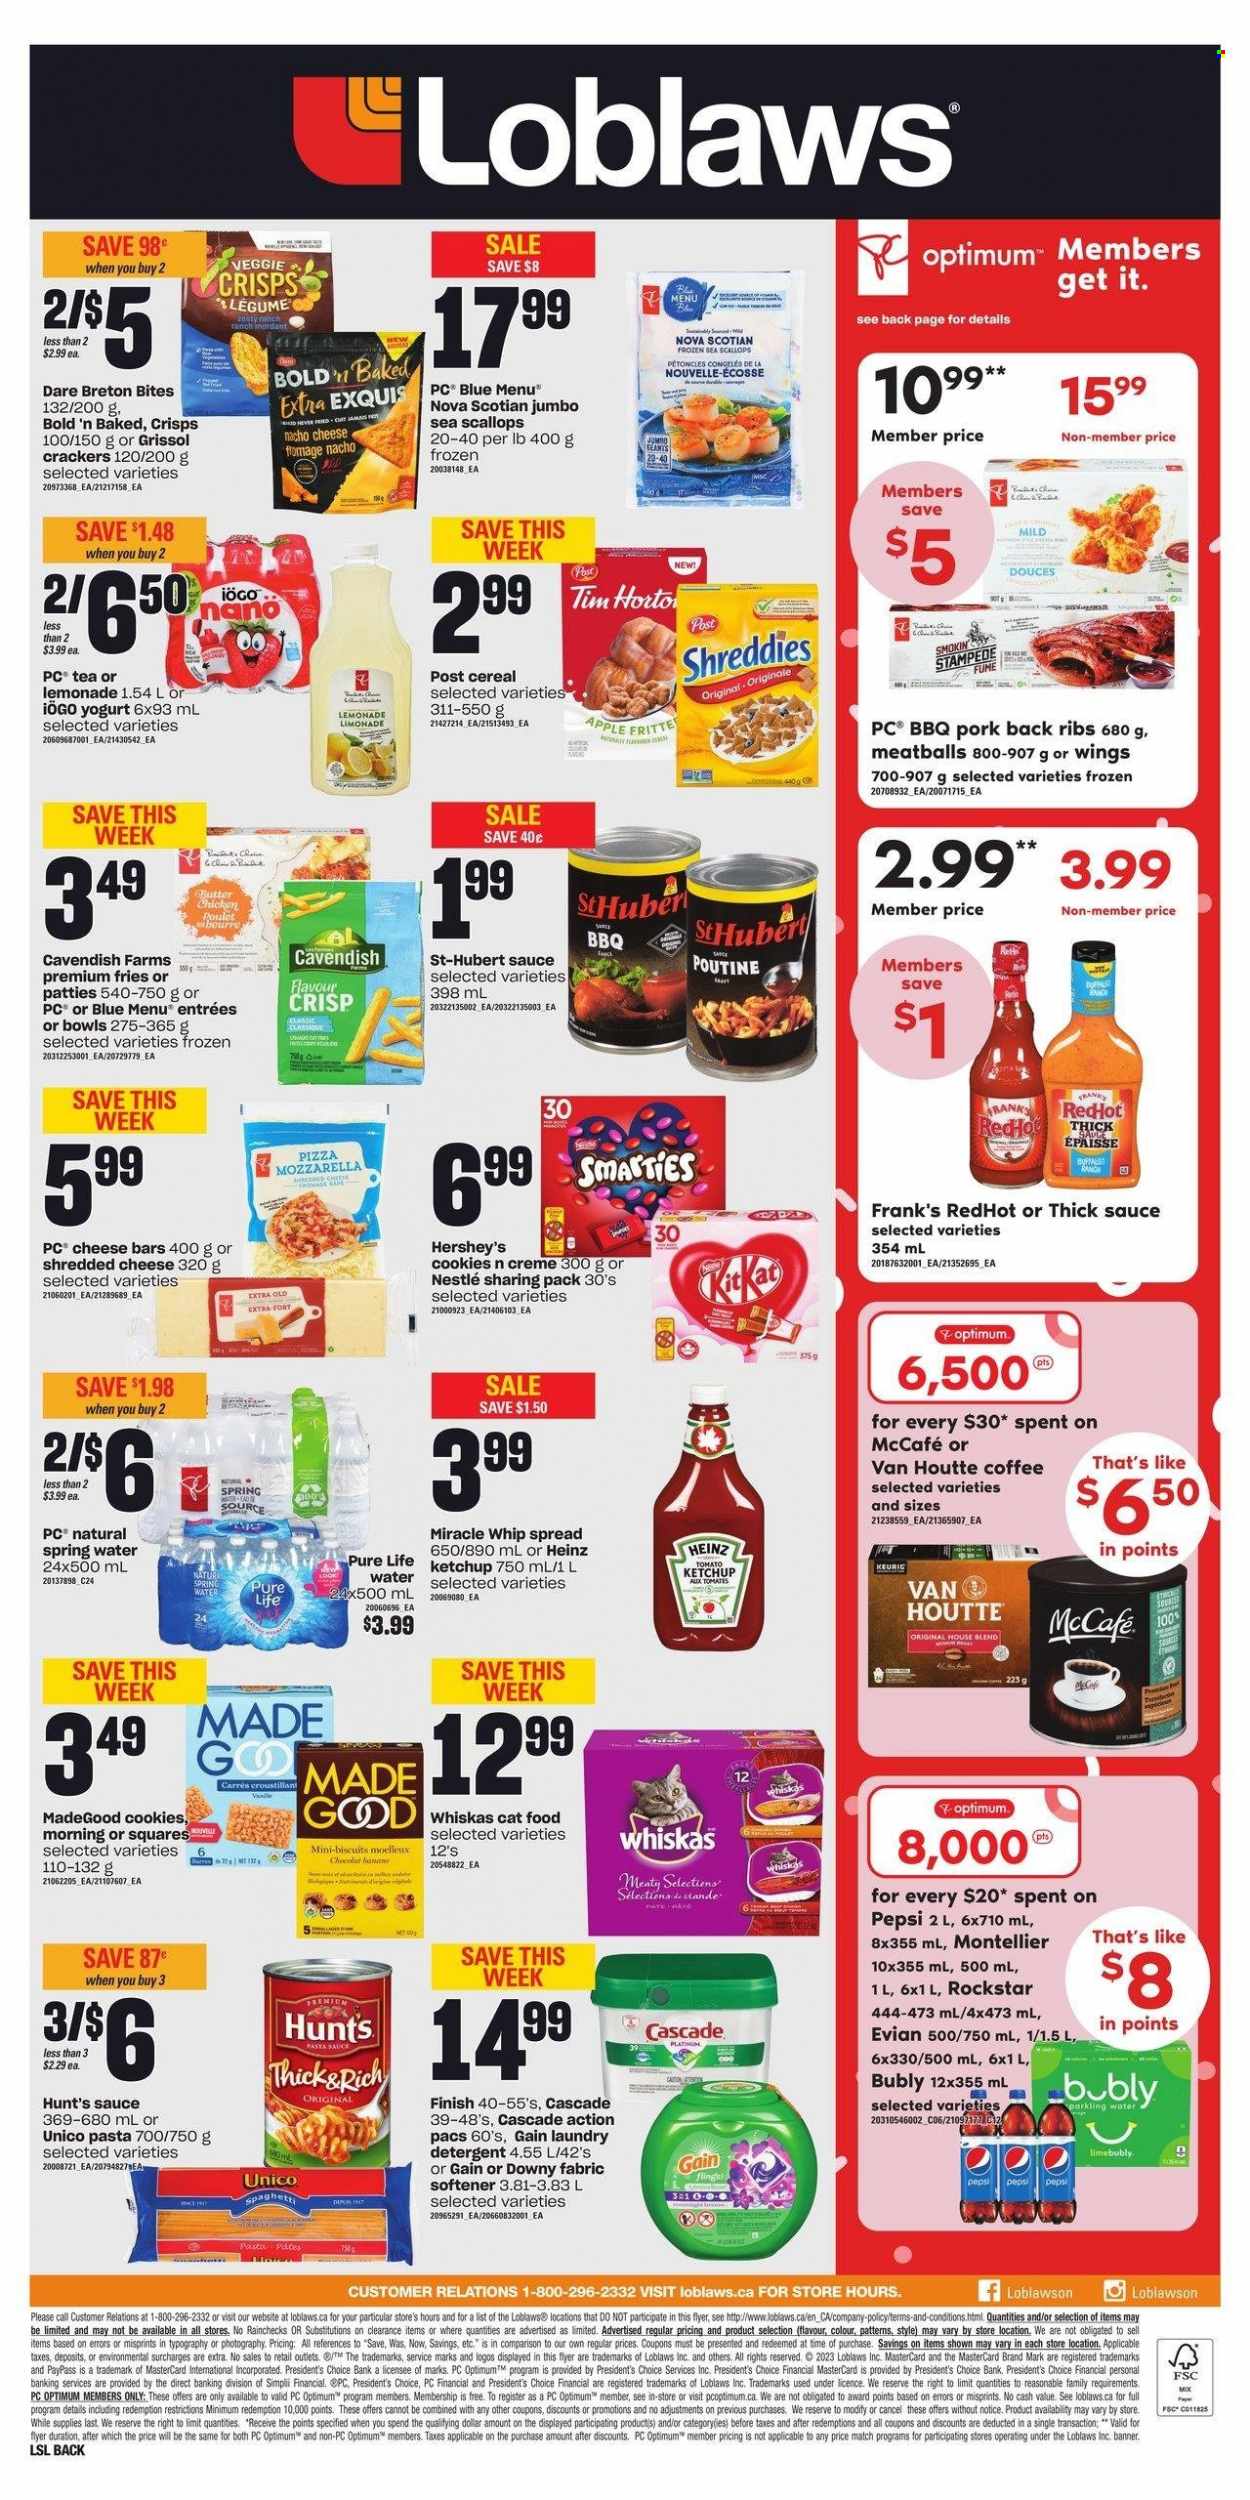 thumbnail - Loblaws Flyer - January 26, 2023 - February 01, 2023 - Sales products - scallops, spaghetti, pizza, meatballs, pasta, shredded cheese, yoghurt, Miracle Whip, Hershey's, potato fries, cookies, crackers, biscuit, cereals, lemonade, Pepsi, Rockstar, spring water, Evian, tea, coffee, McCafe, ribs, pork meat, pork ribs, pork back ribs, Gain, fabric softener, laundry detergent, Cascade, Downy Laundry, animal food, cat food, Optimum, Apple, detergent, Nestlé, Heinz, ketchup, steak, Whiskas, Smarties. Page 2.